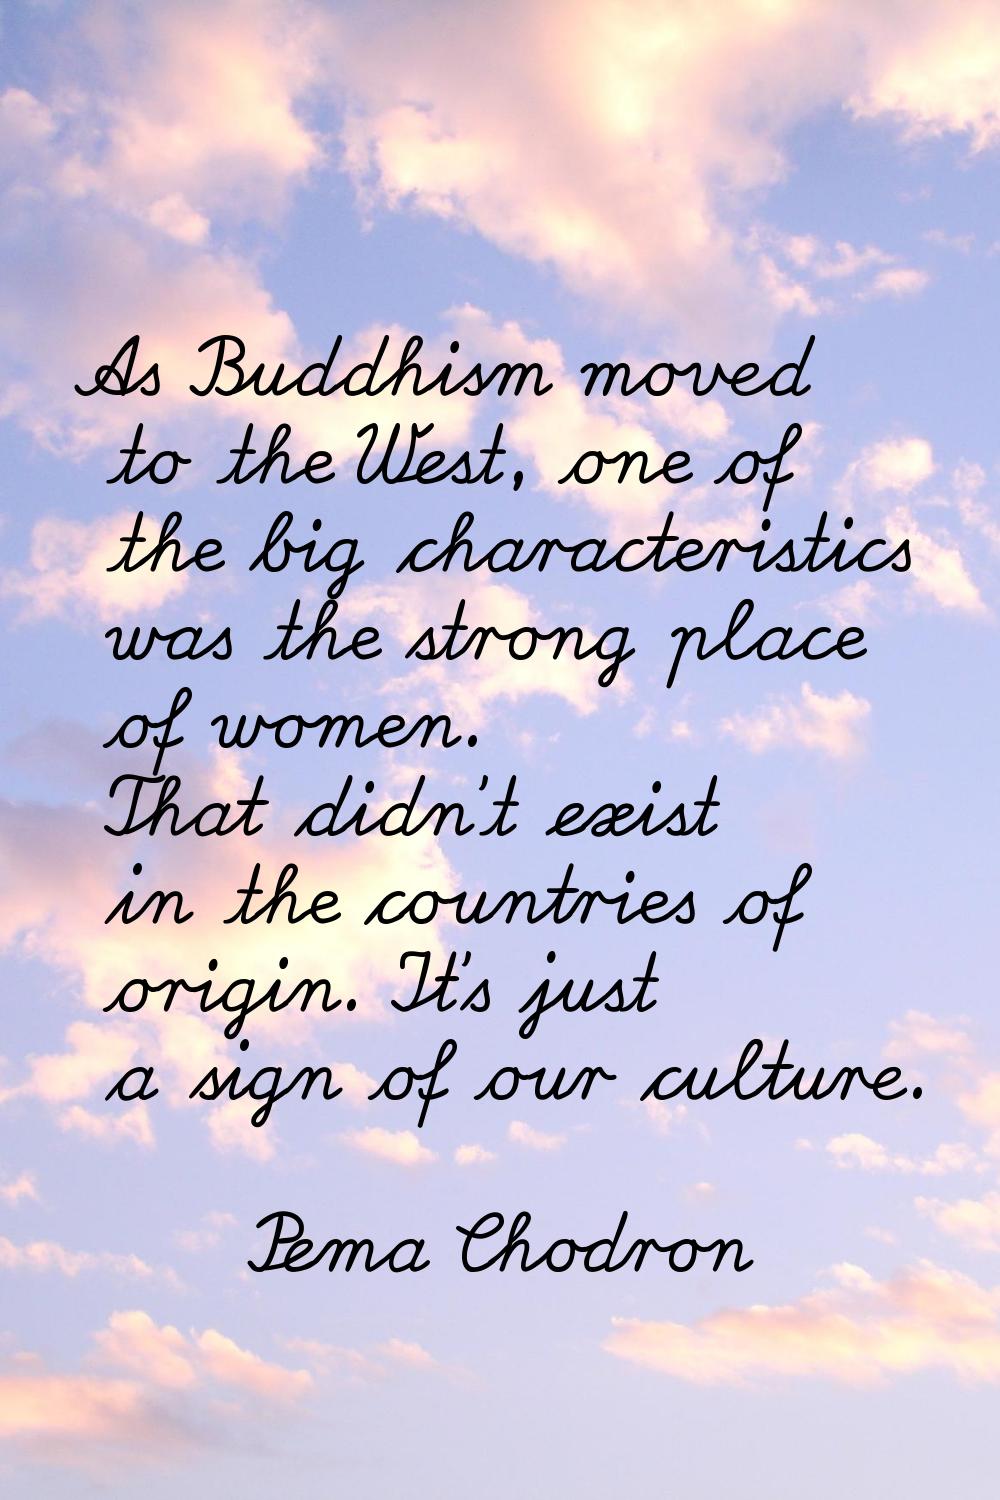 As Buddhism moved to the West, one of the big characteristics was the strong place of women. That d